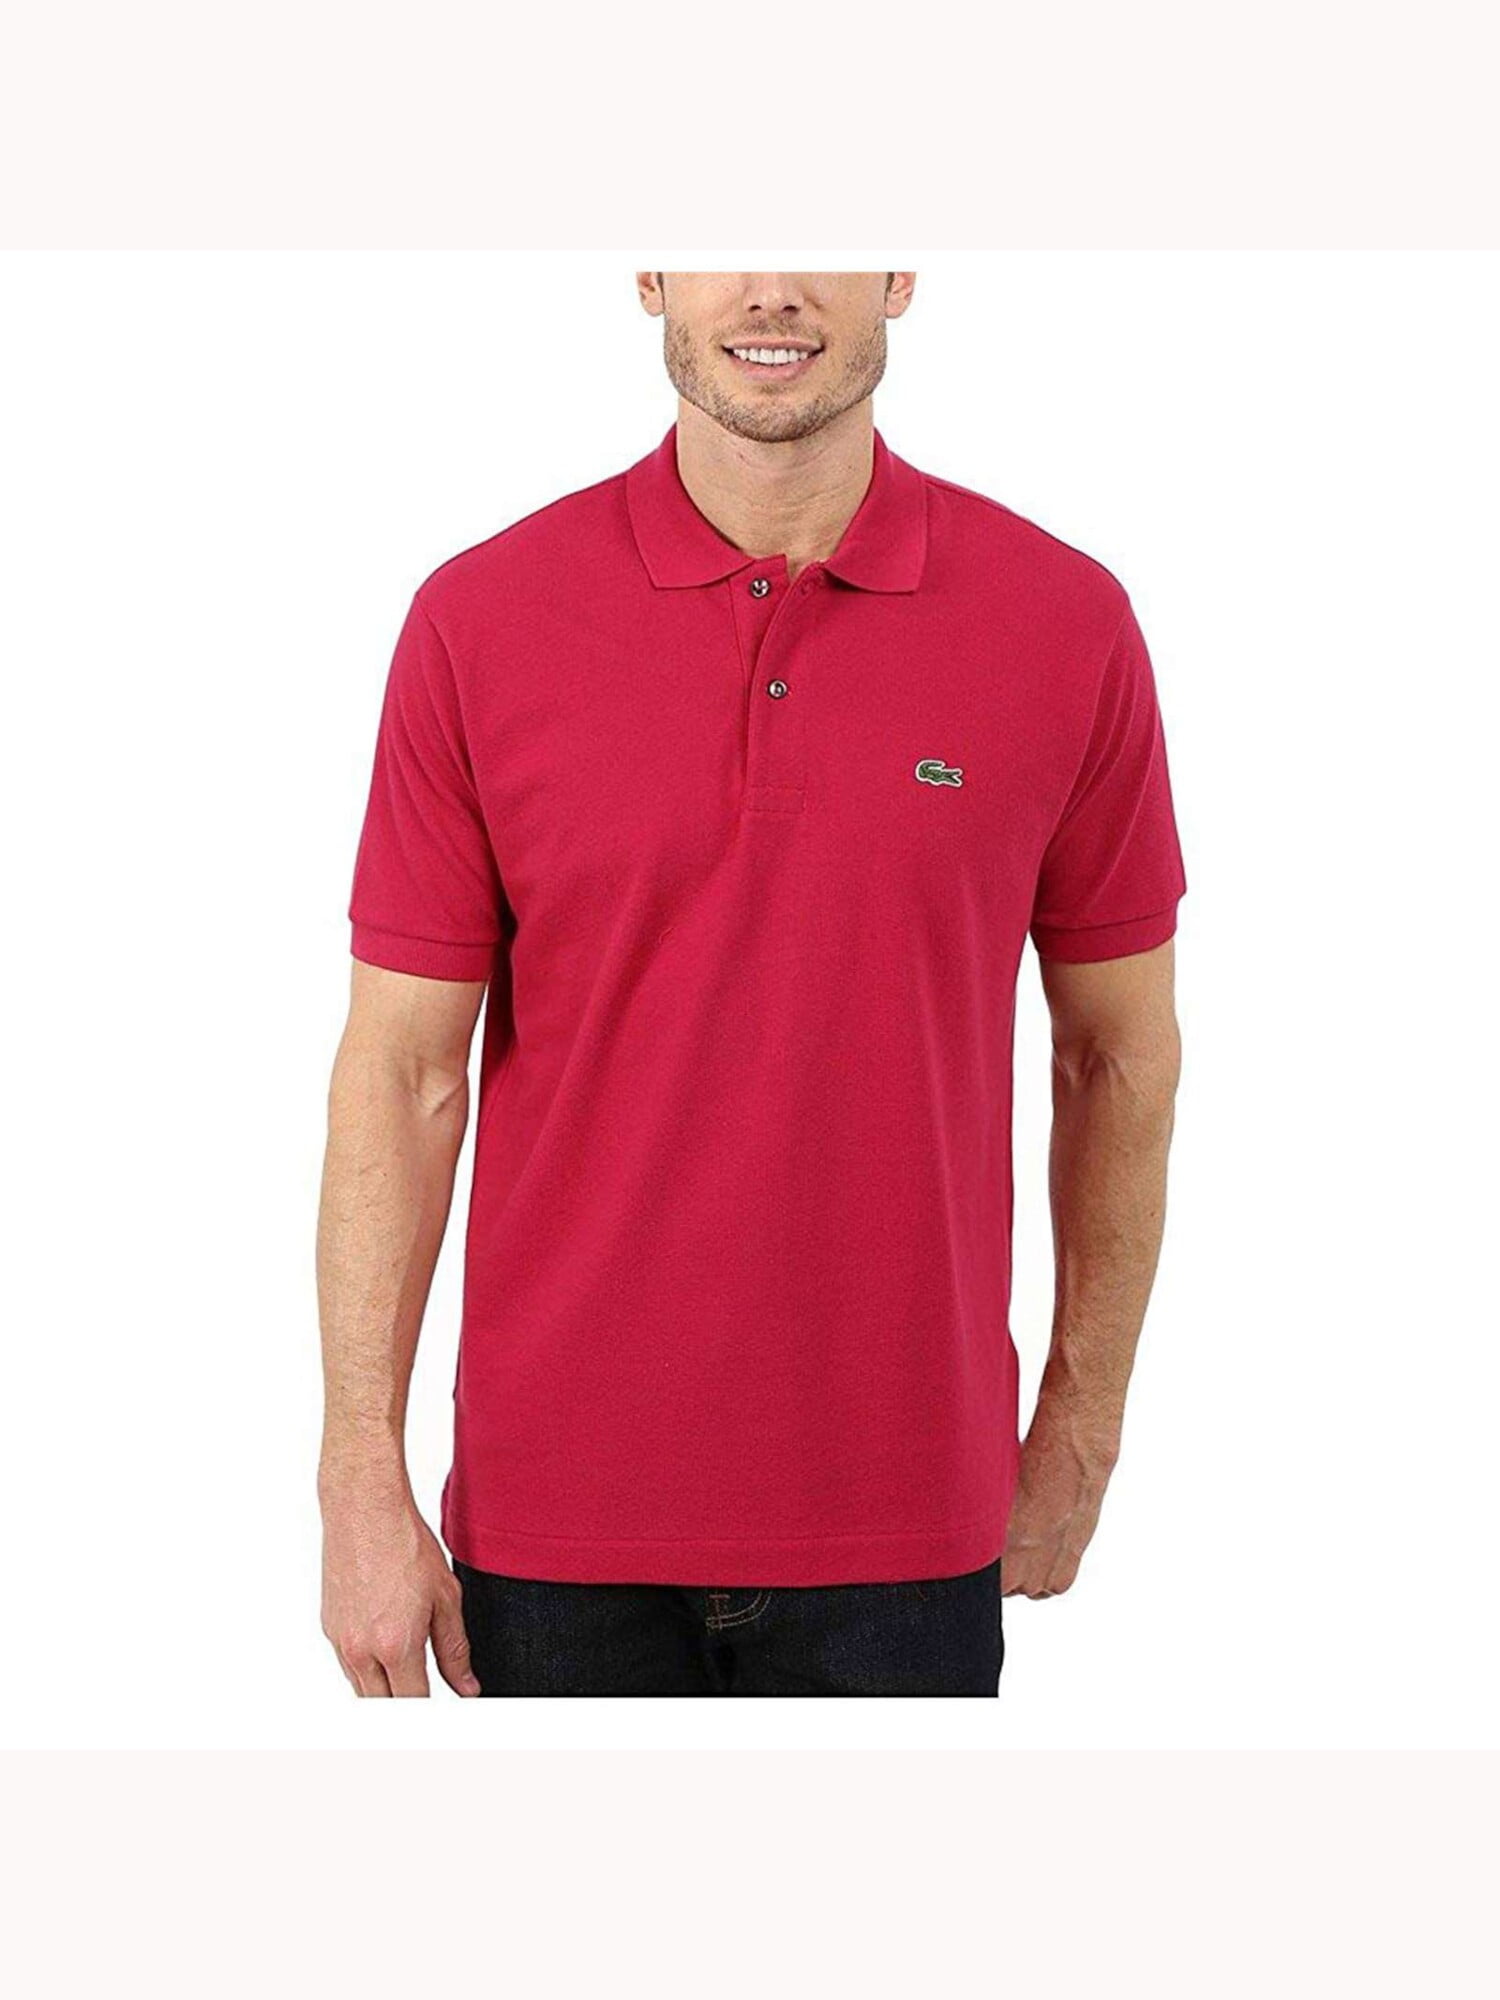 LACOSTE POLO SHIRT MENS RED CLASSIC FIT SHORT SLEEVE TOP 